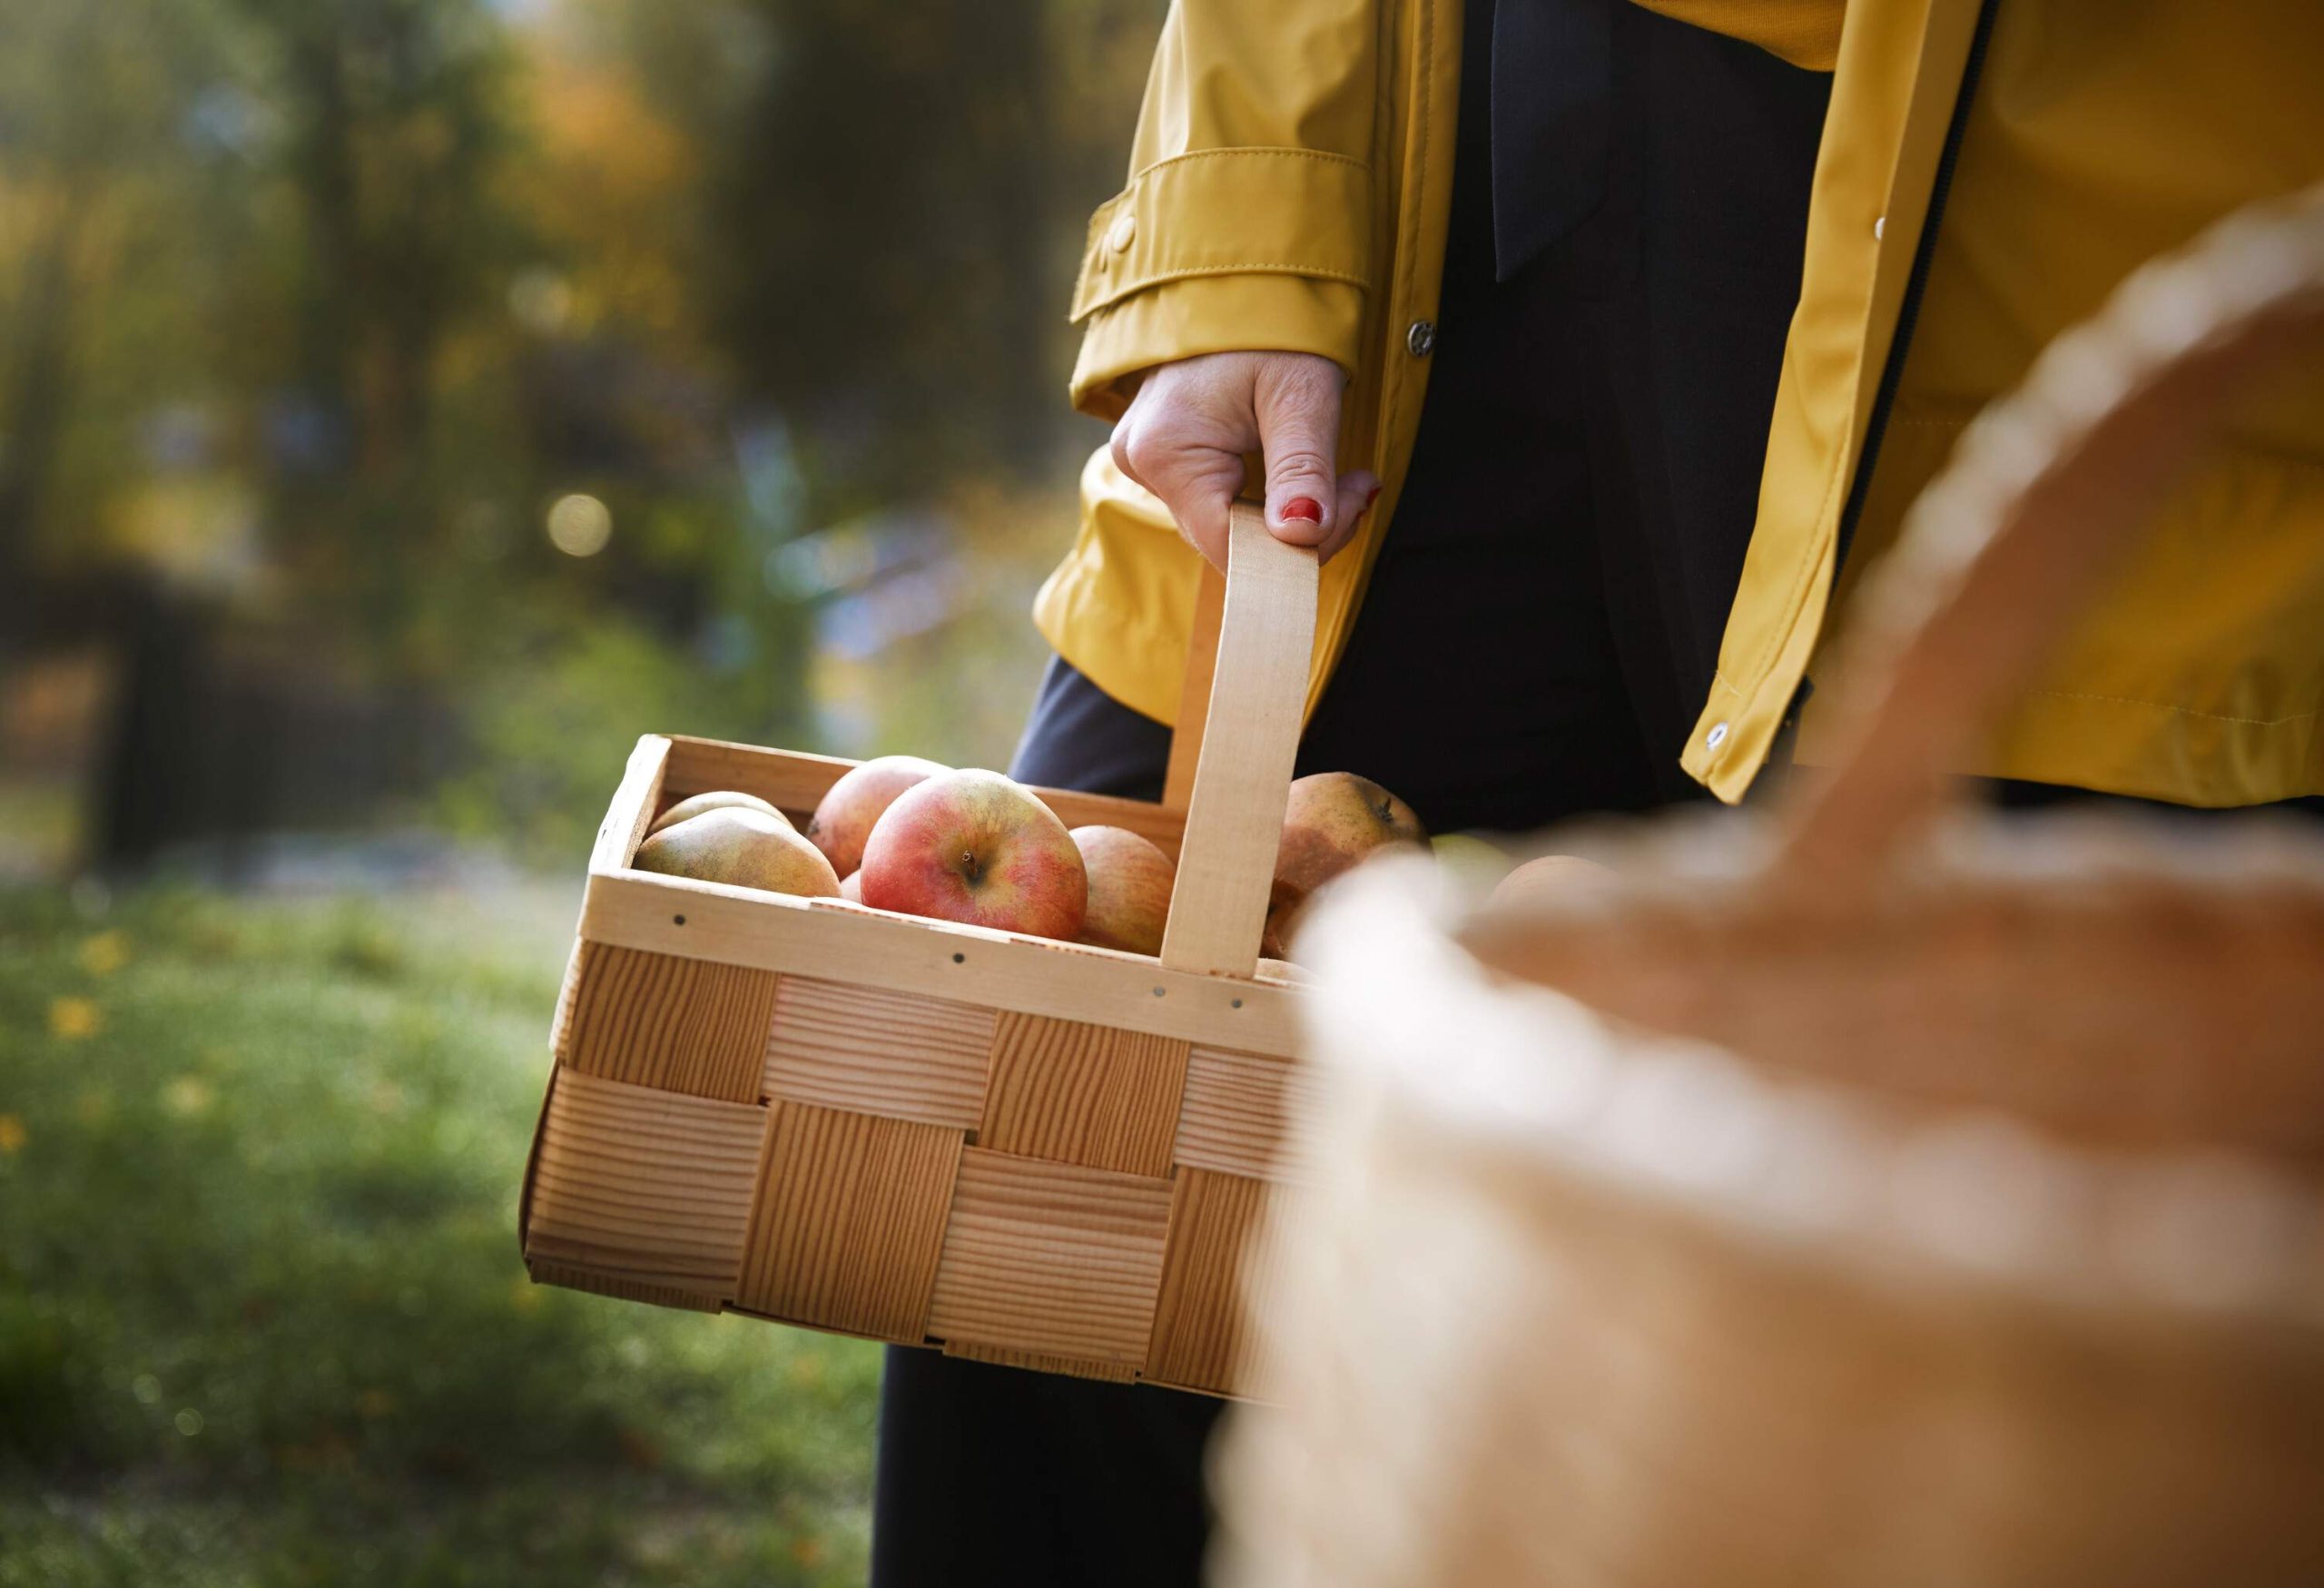 A person in a yellow jacket holding a basketful of apples.